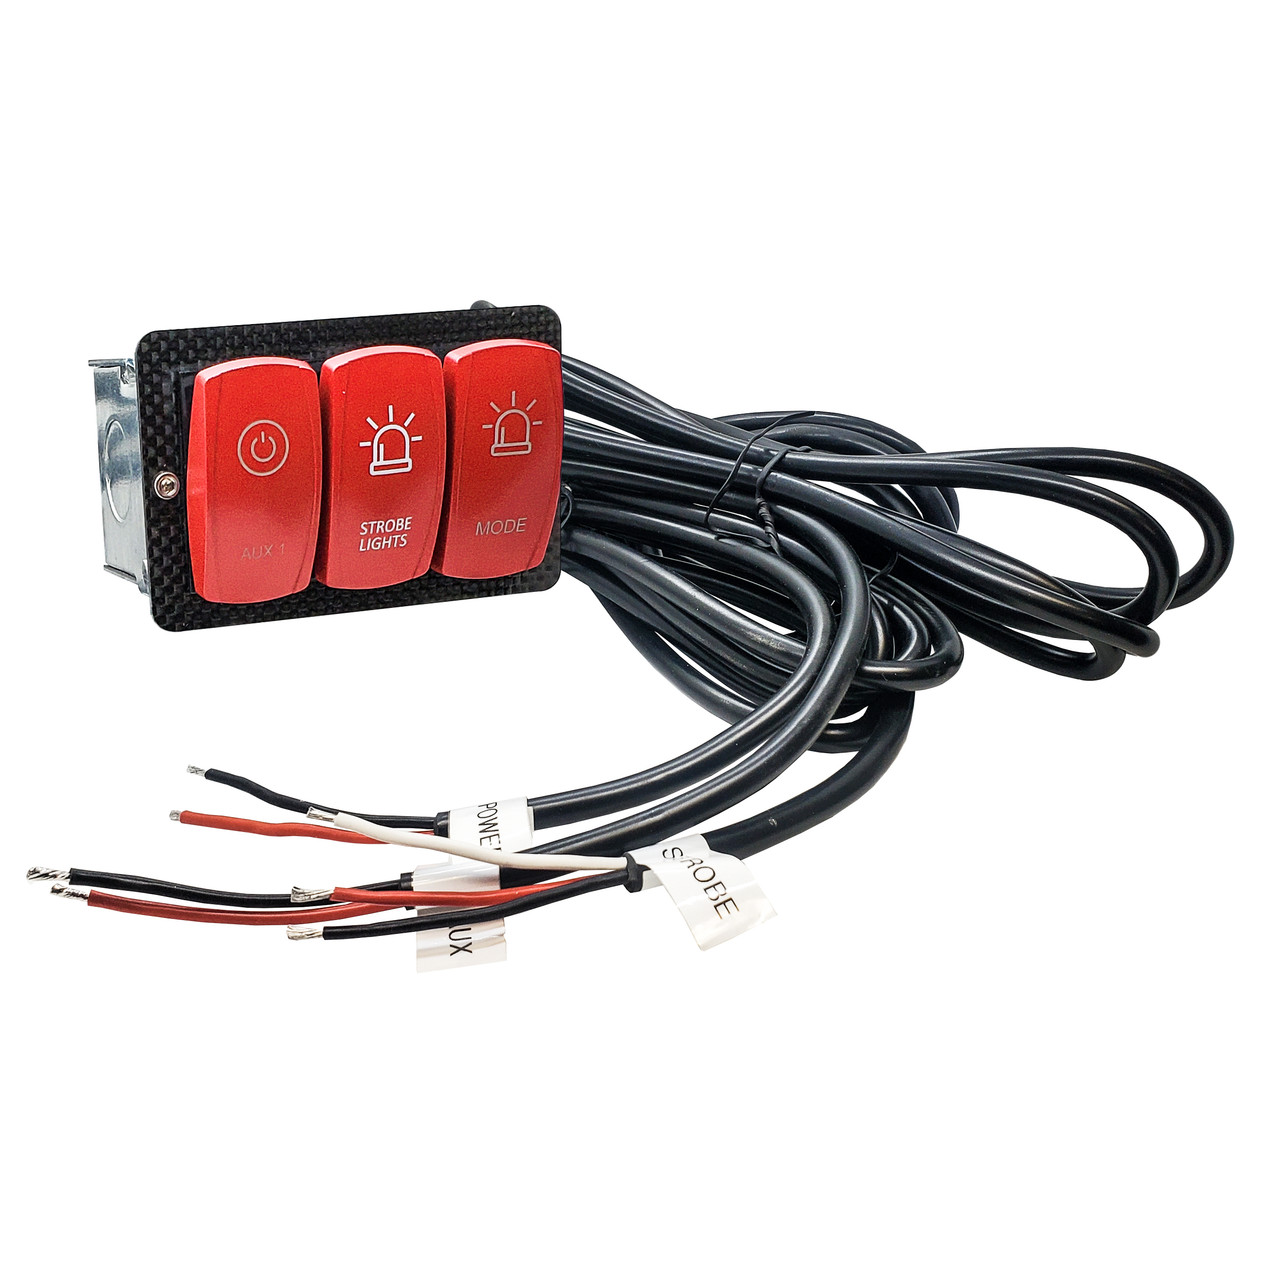 15A Dual Output On/Off Rocker Switch Control Box with Momentary Switch for  Dynamic Flashing Pattern Control for Emergency Beacon Warning Strobe Lights  - OZ